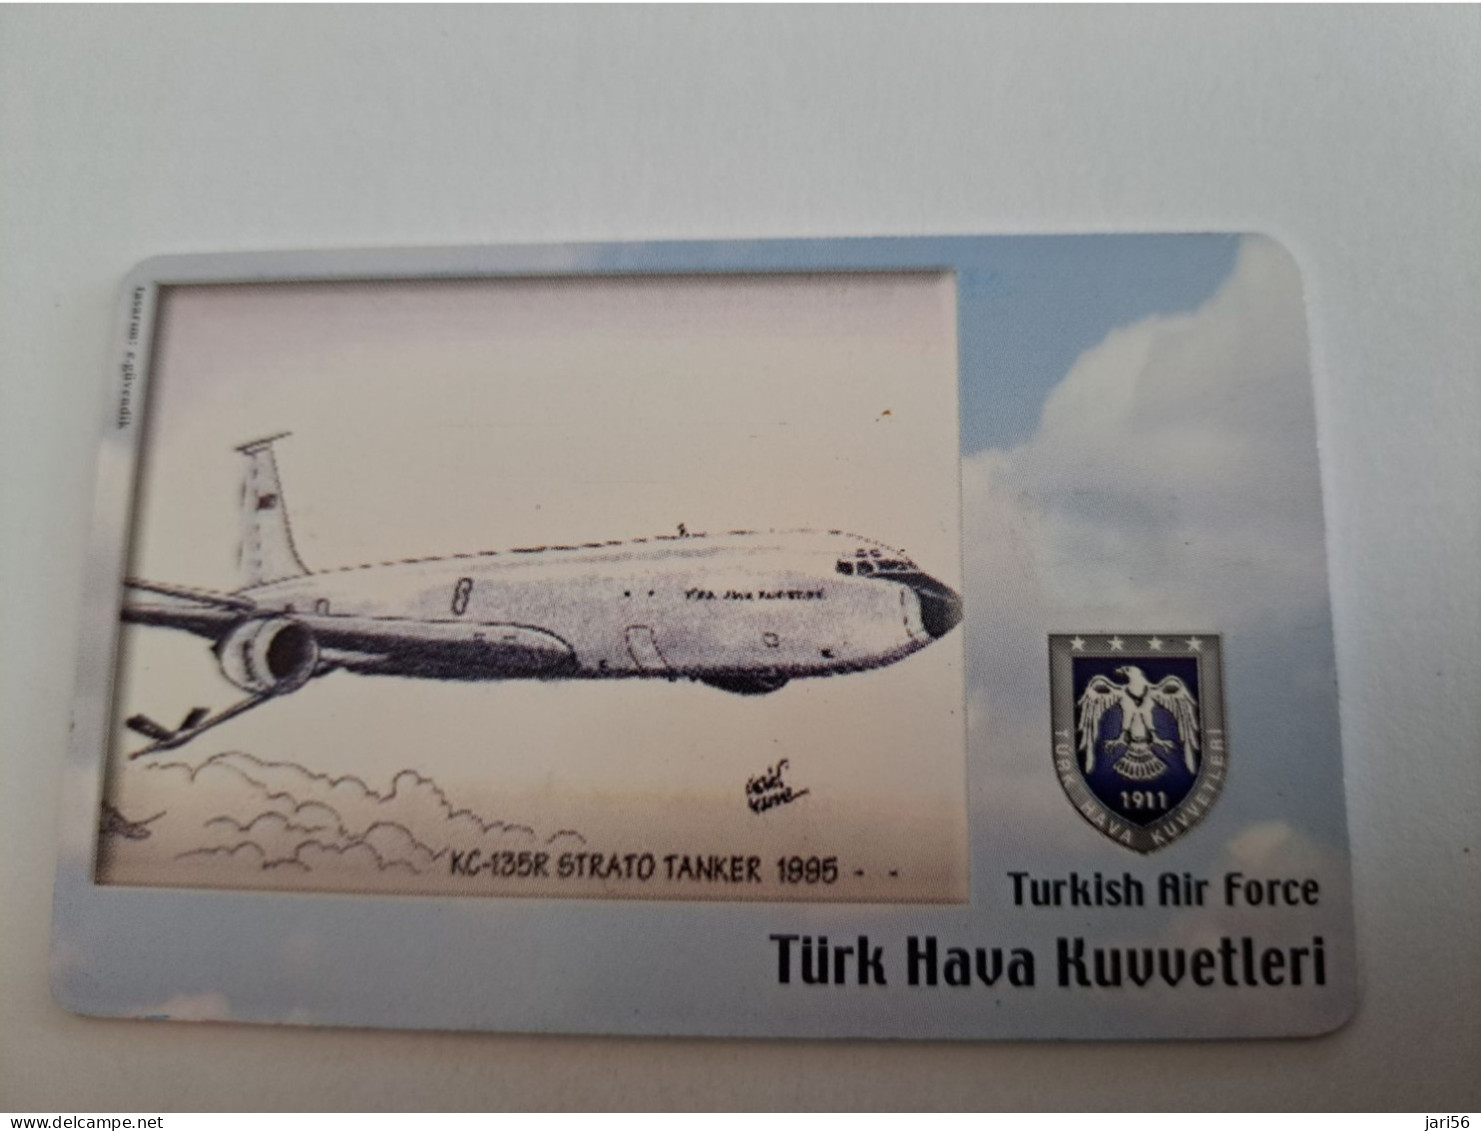 TURKIJE / 50 UNITS/ CHIPCARD/ TURKISH AIR FORCE  / DIFFERENT PLANES /        Fine Used Card  **15441** - Turquie